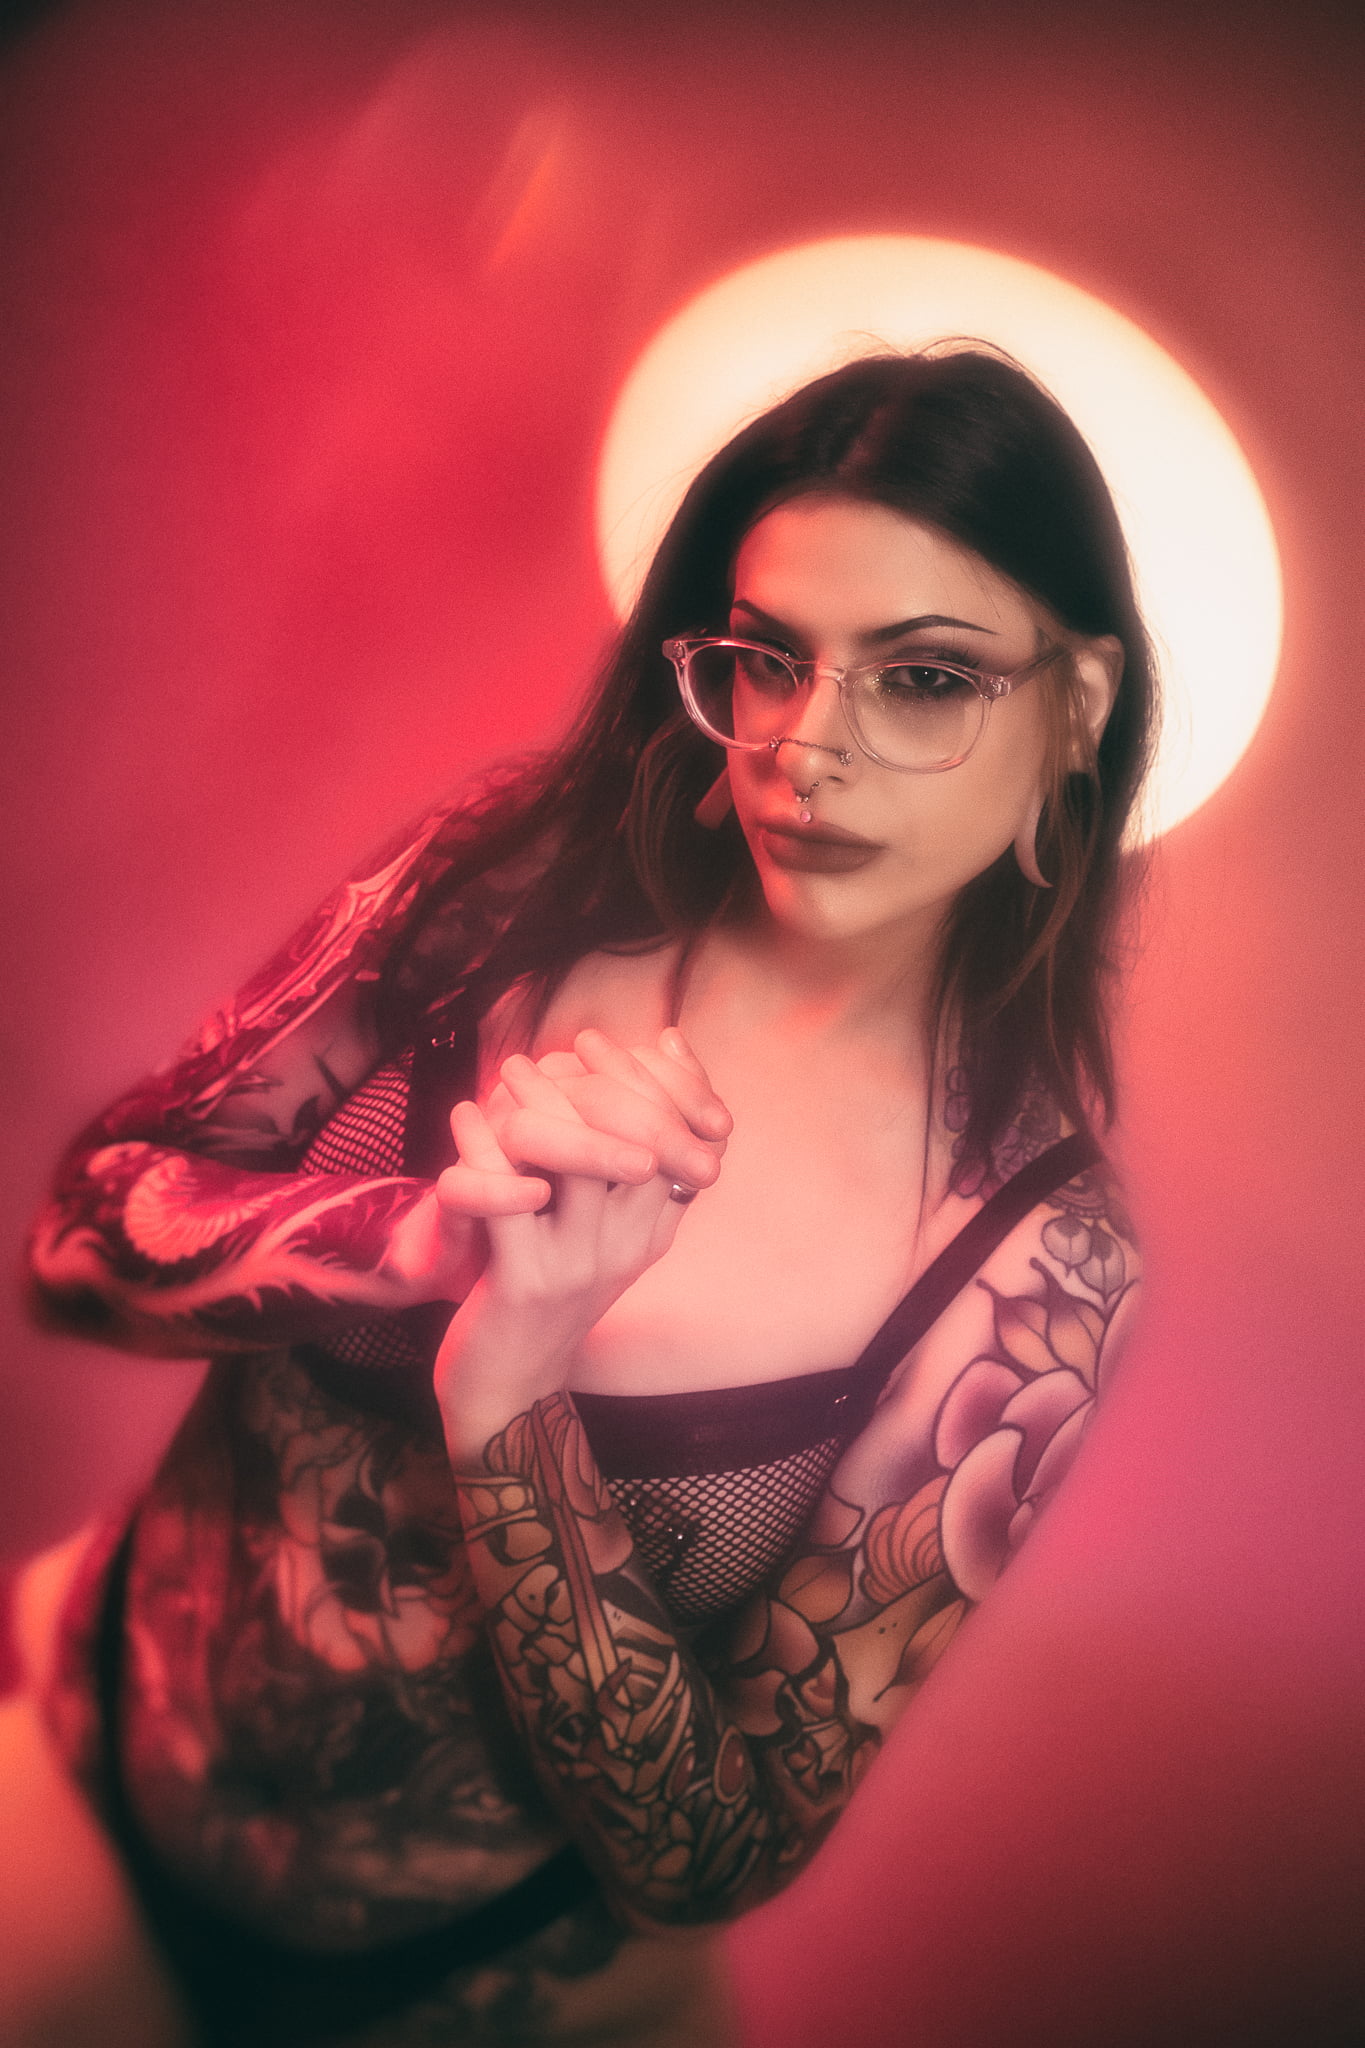 a person with tattoos and glasses